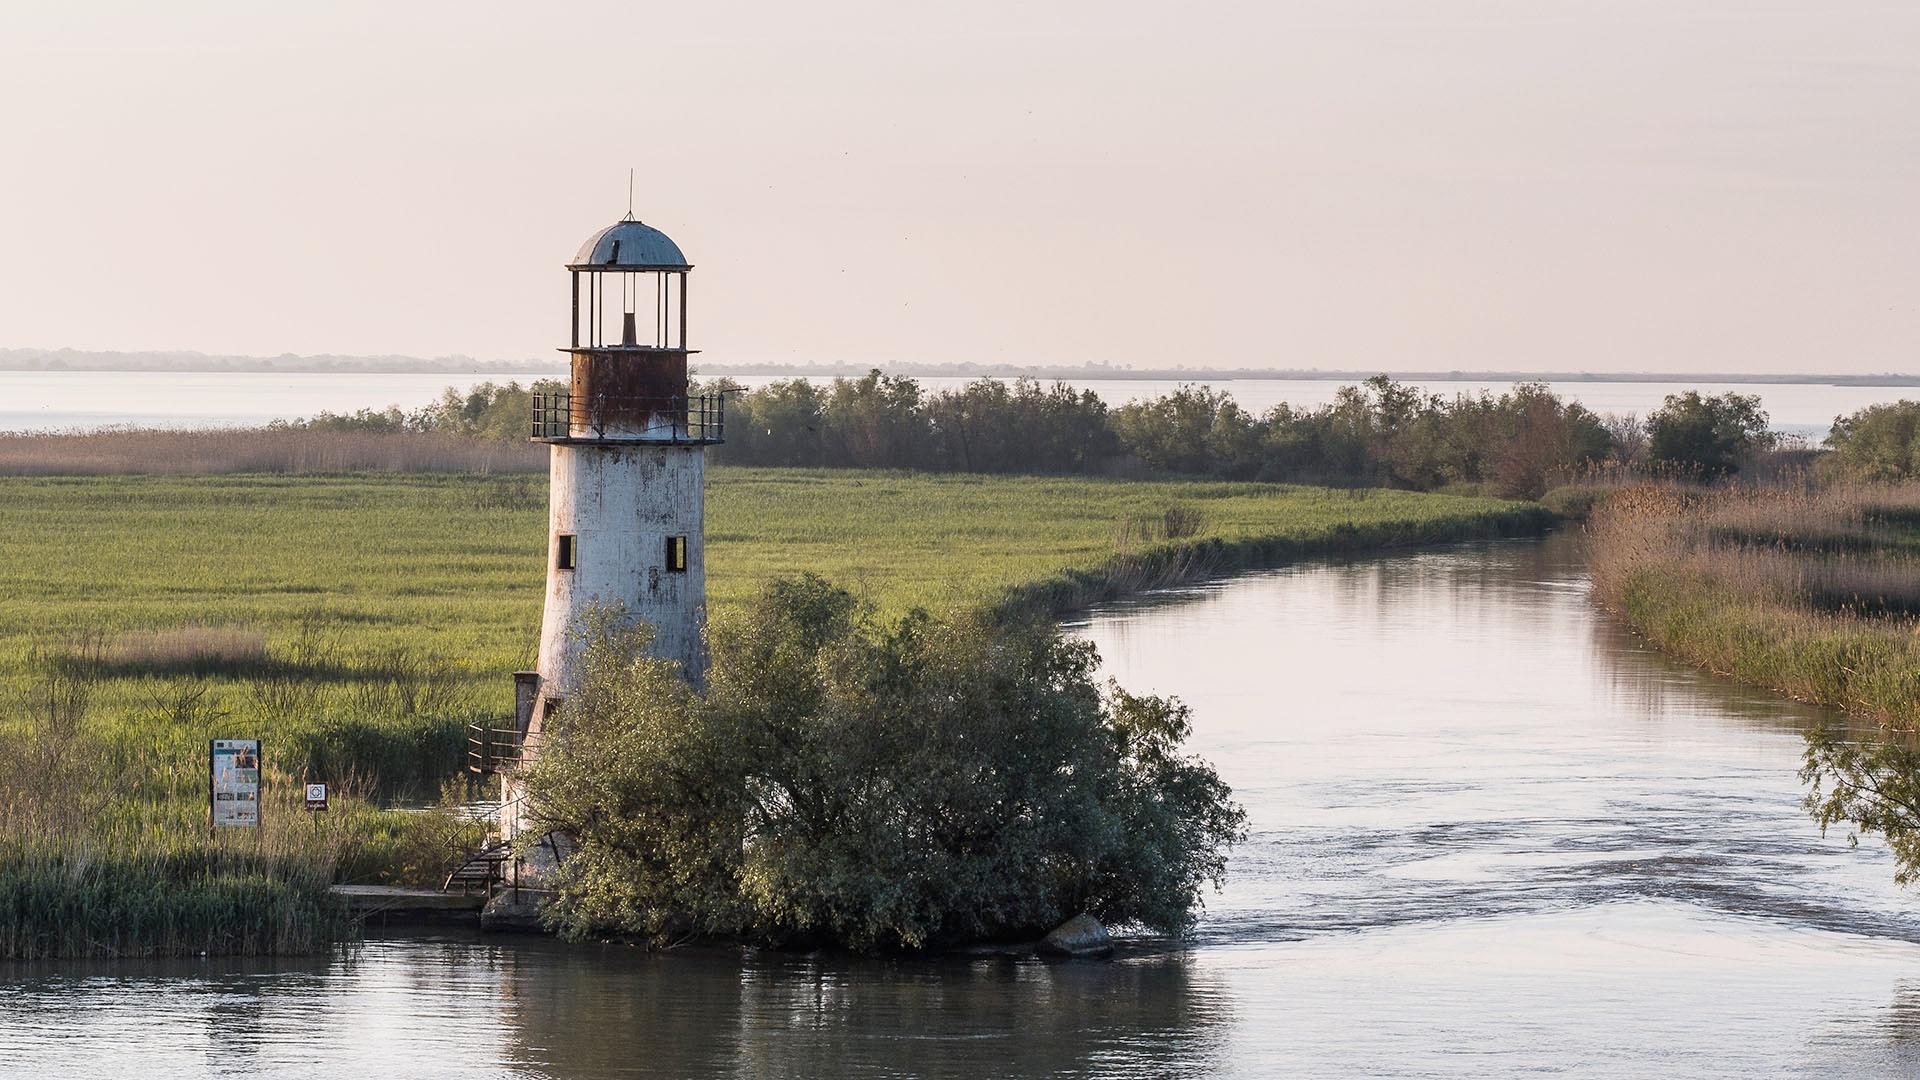 Image of a lighthouse on the Delta.